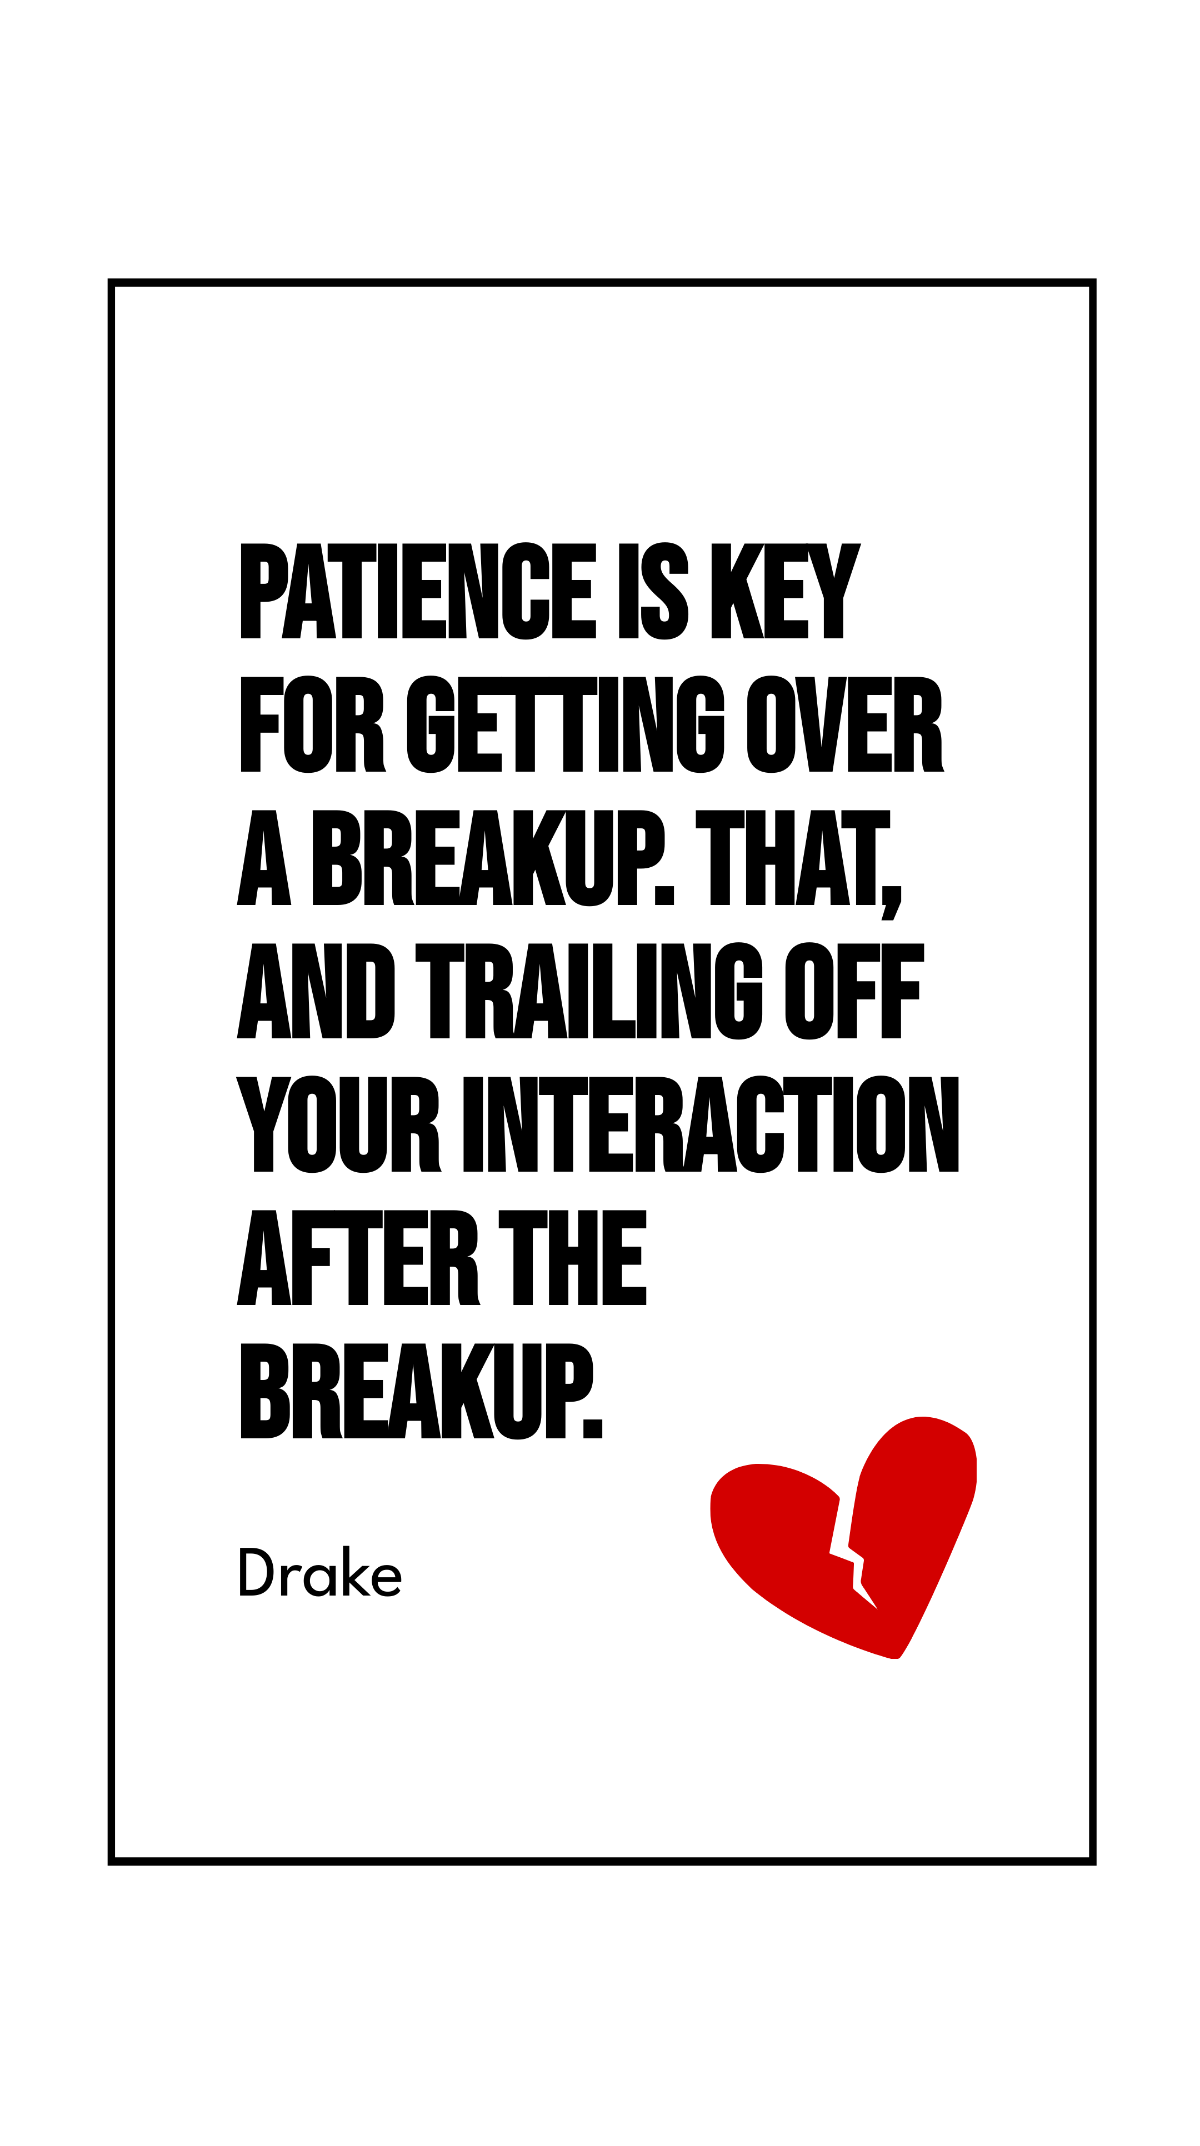 Drake - Patience is key for getting over a breakup. That, and trailing off your interaction after the breakup.